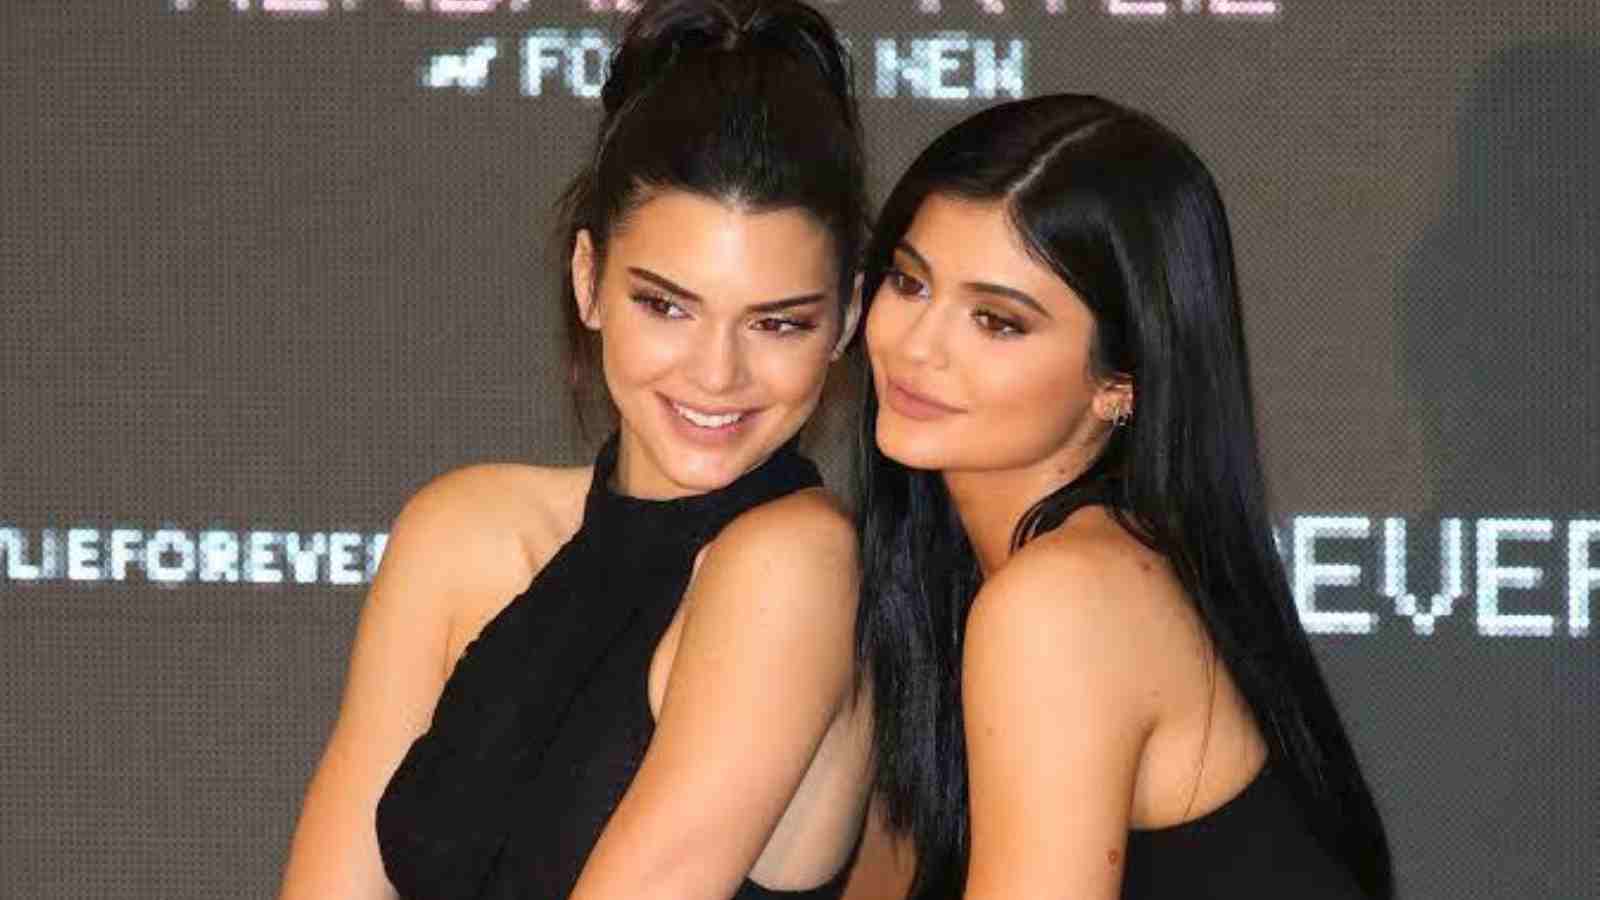 Kylie Jenner's pregnancy reminder to Kendall Jenner that she is not ready to have children yet